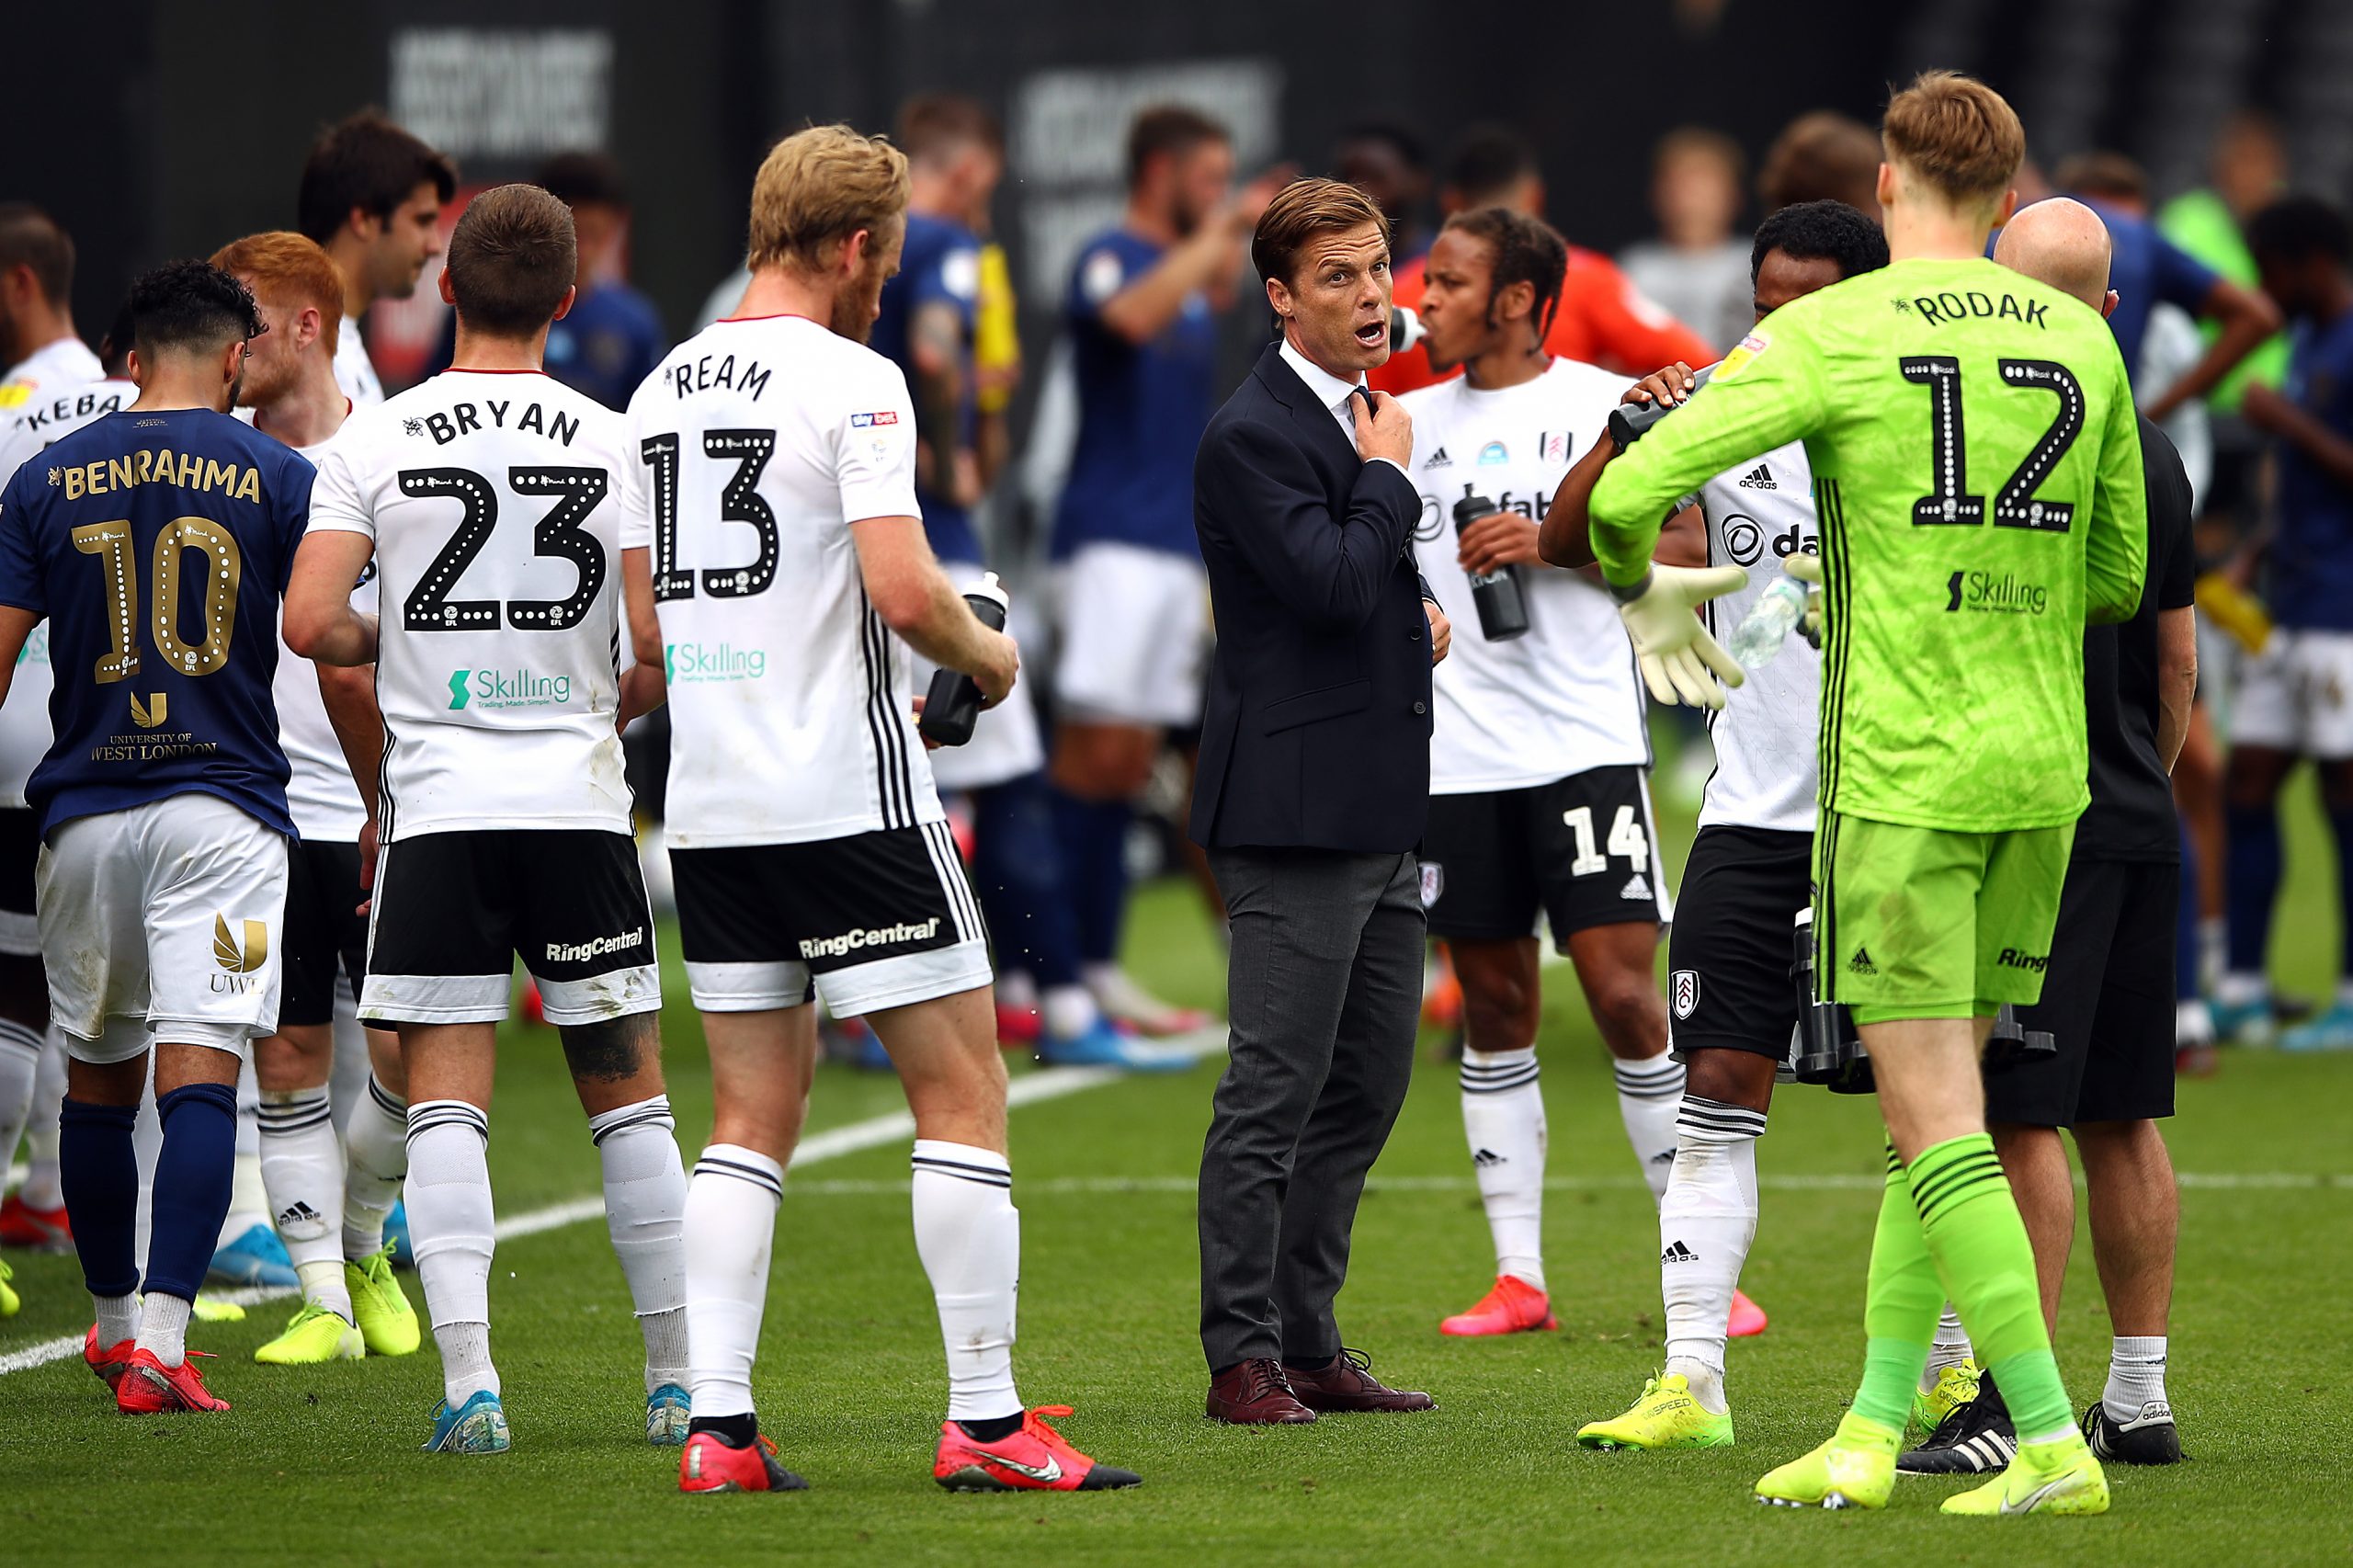 Fulham manager Scott Parker talks to his players during a break in play in the Sky Bet Championship match between Fulham and Brentford at Craven Cottage last month.